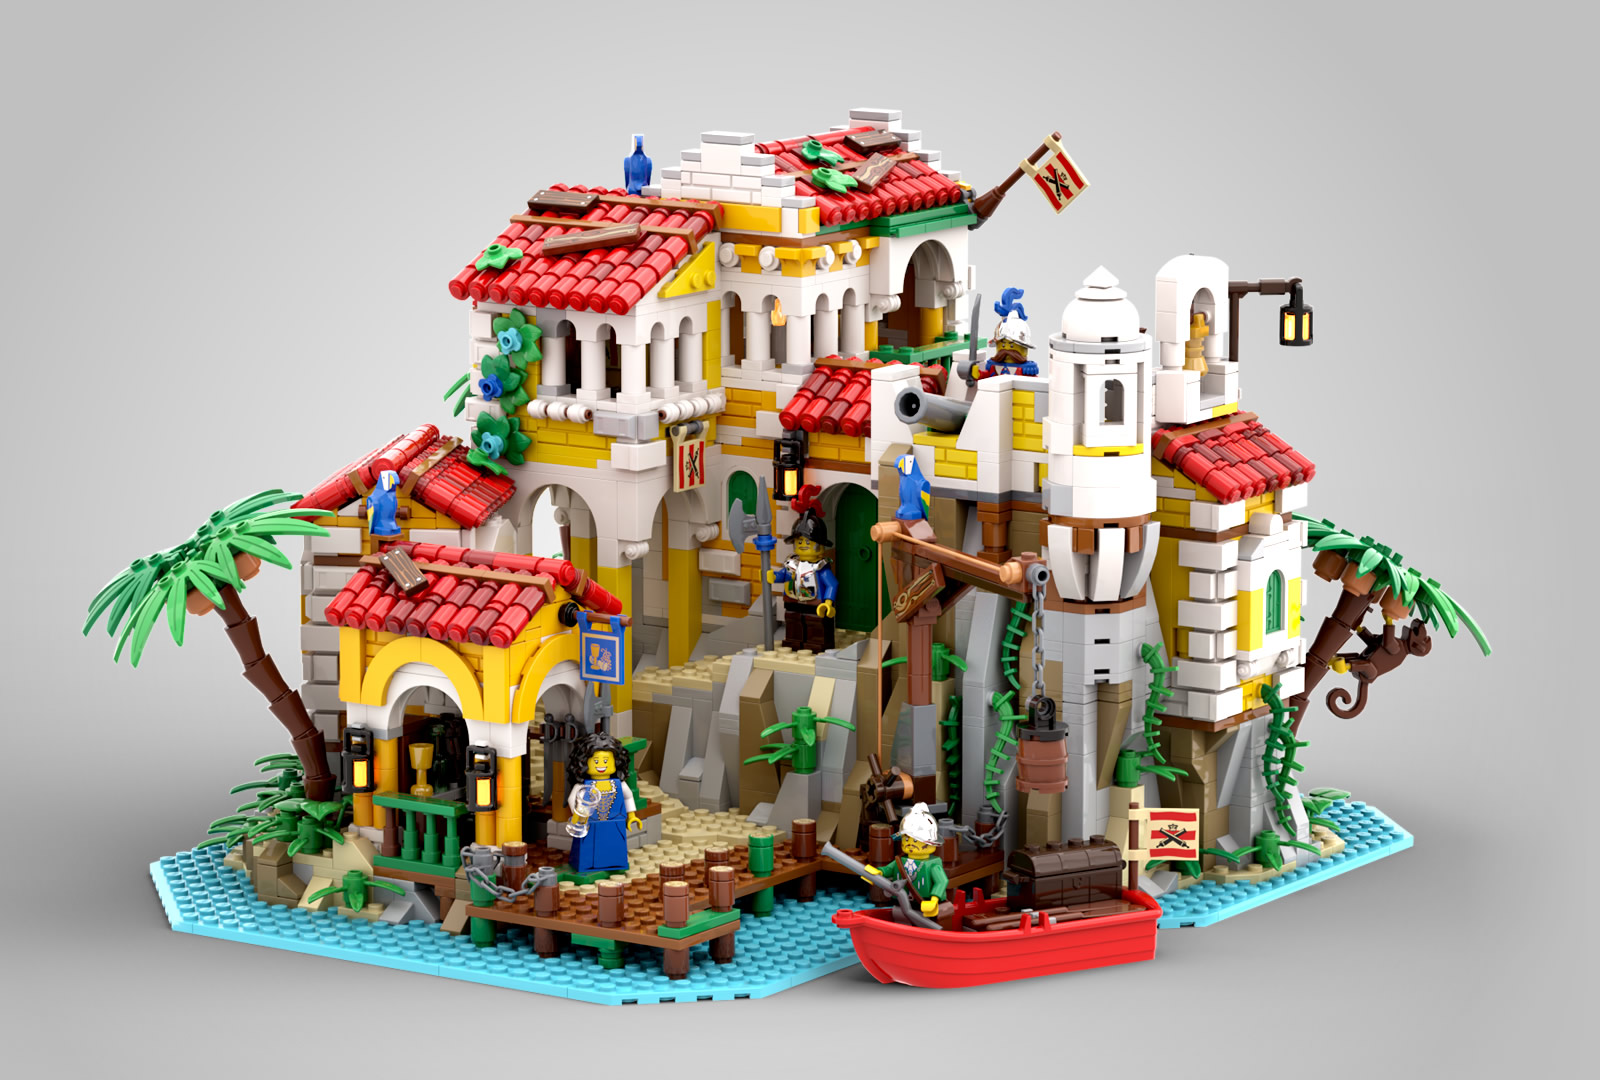 LEGO Ideas Happier Than Ever Achieves 10,000 Supporters - The